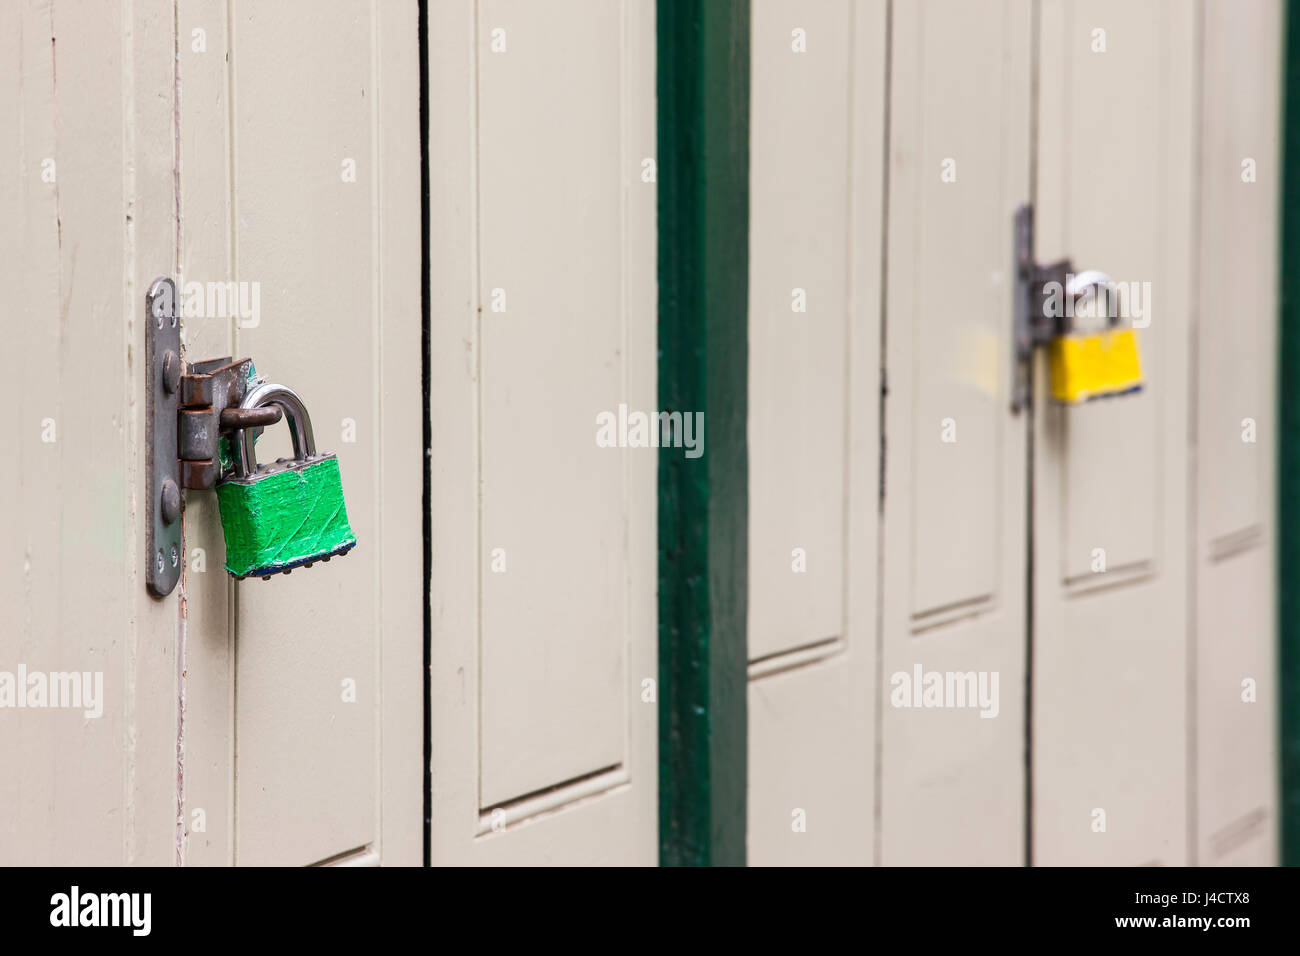 Coloured padlocks on a metal clasp, securing wooden doors. Stock Photo